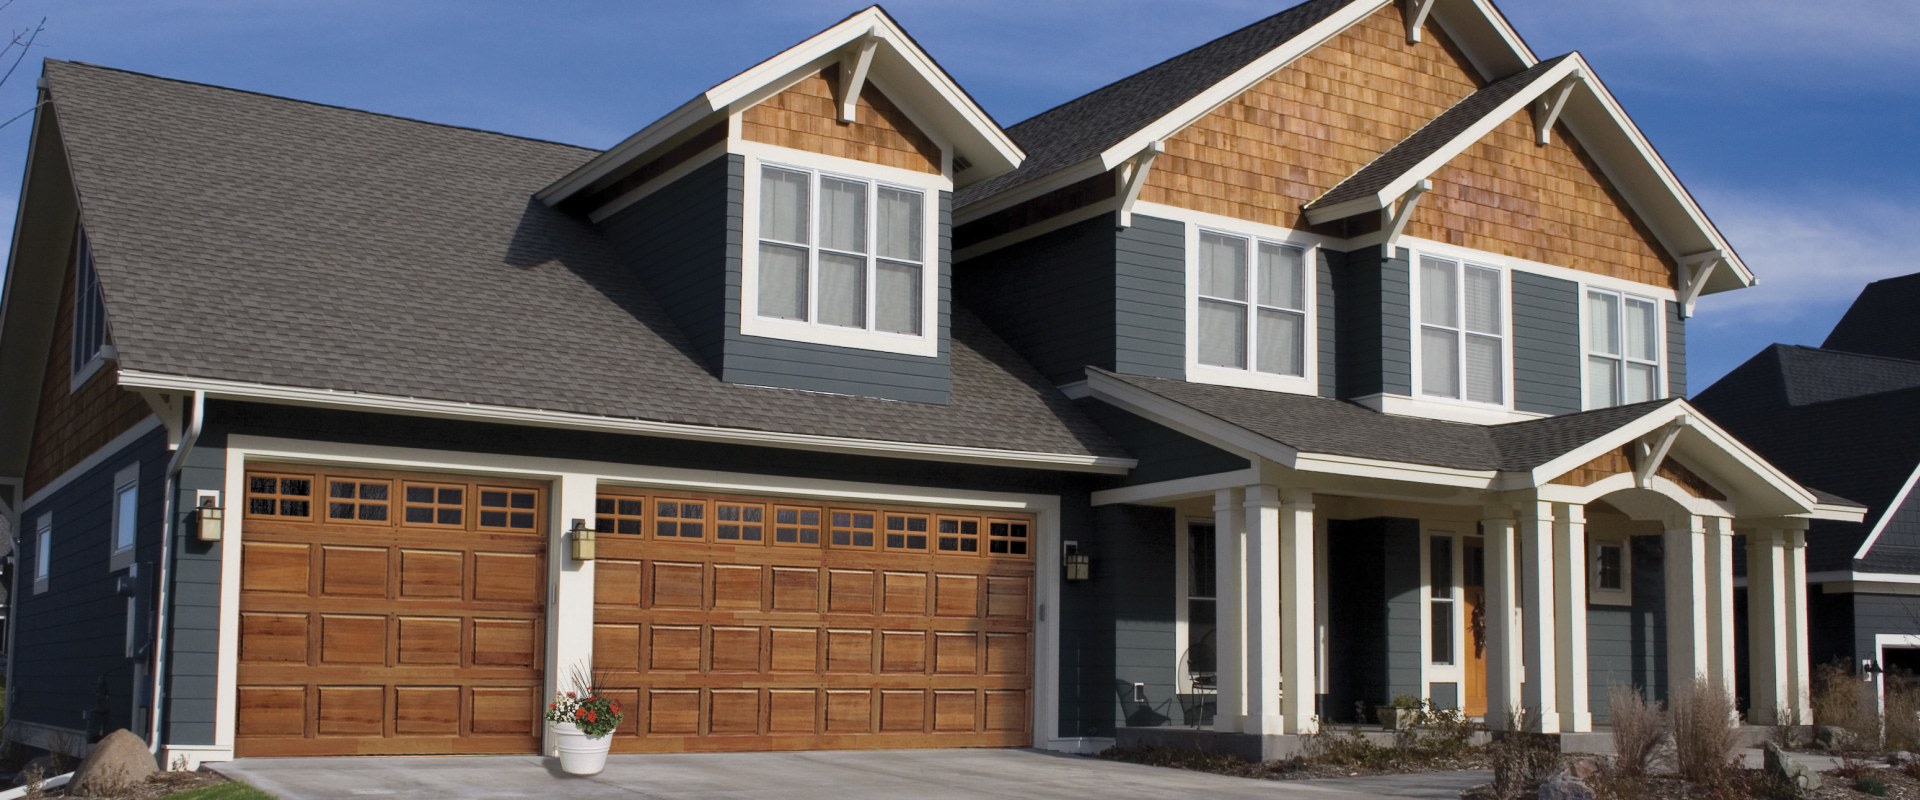 Choosing The Right Garage Door For Your Home Remodel In Leamington, Ontario: Residential Vs. Commercial